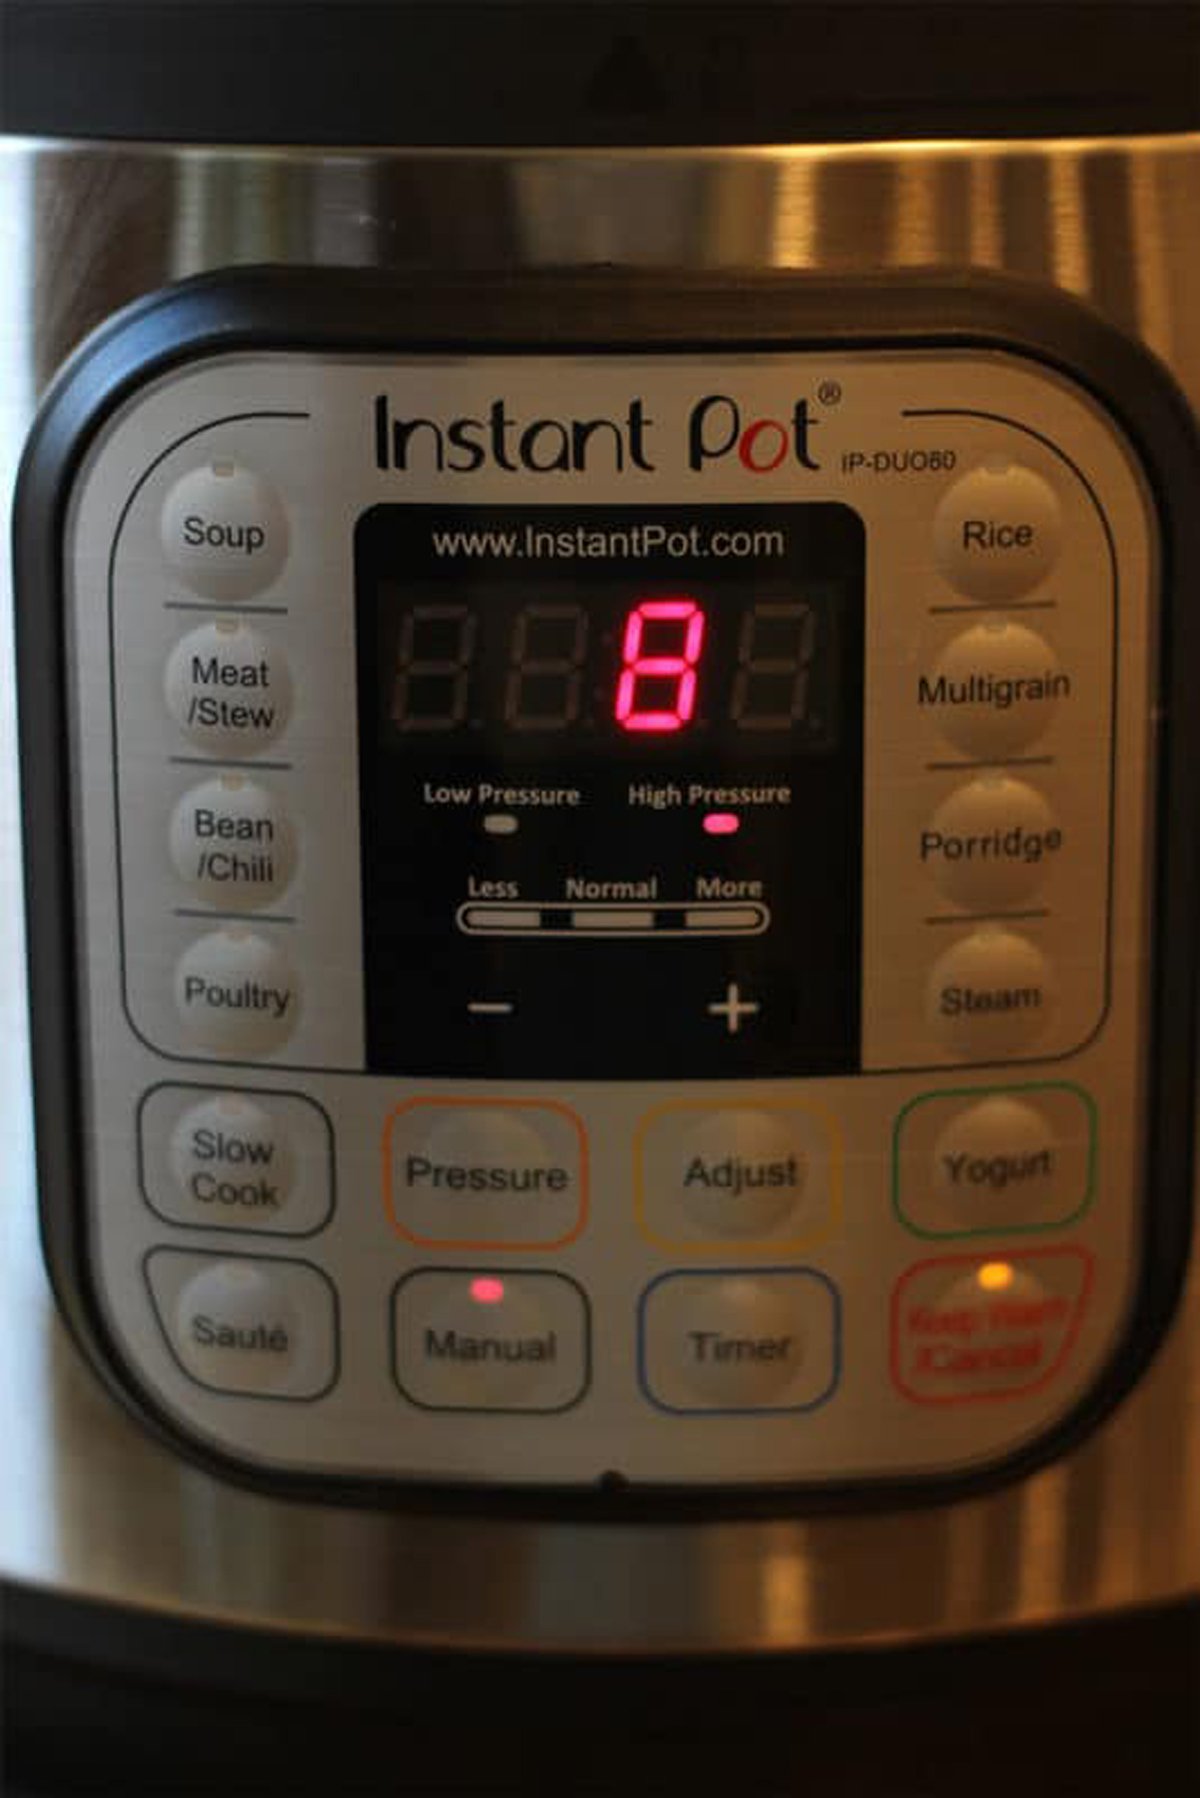 Instant Pot in Manual Mode at 8 minutes.